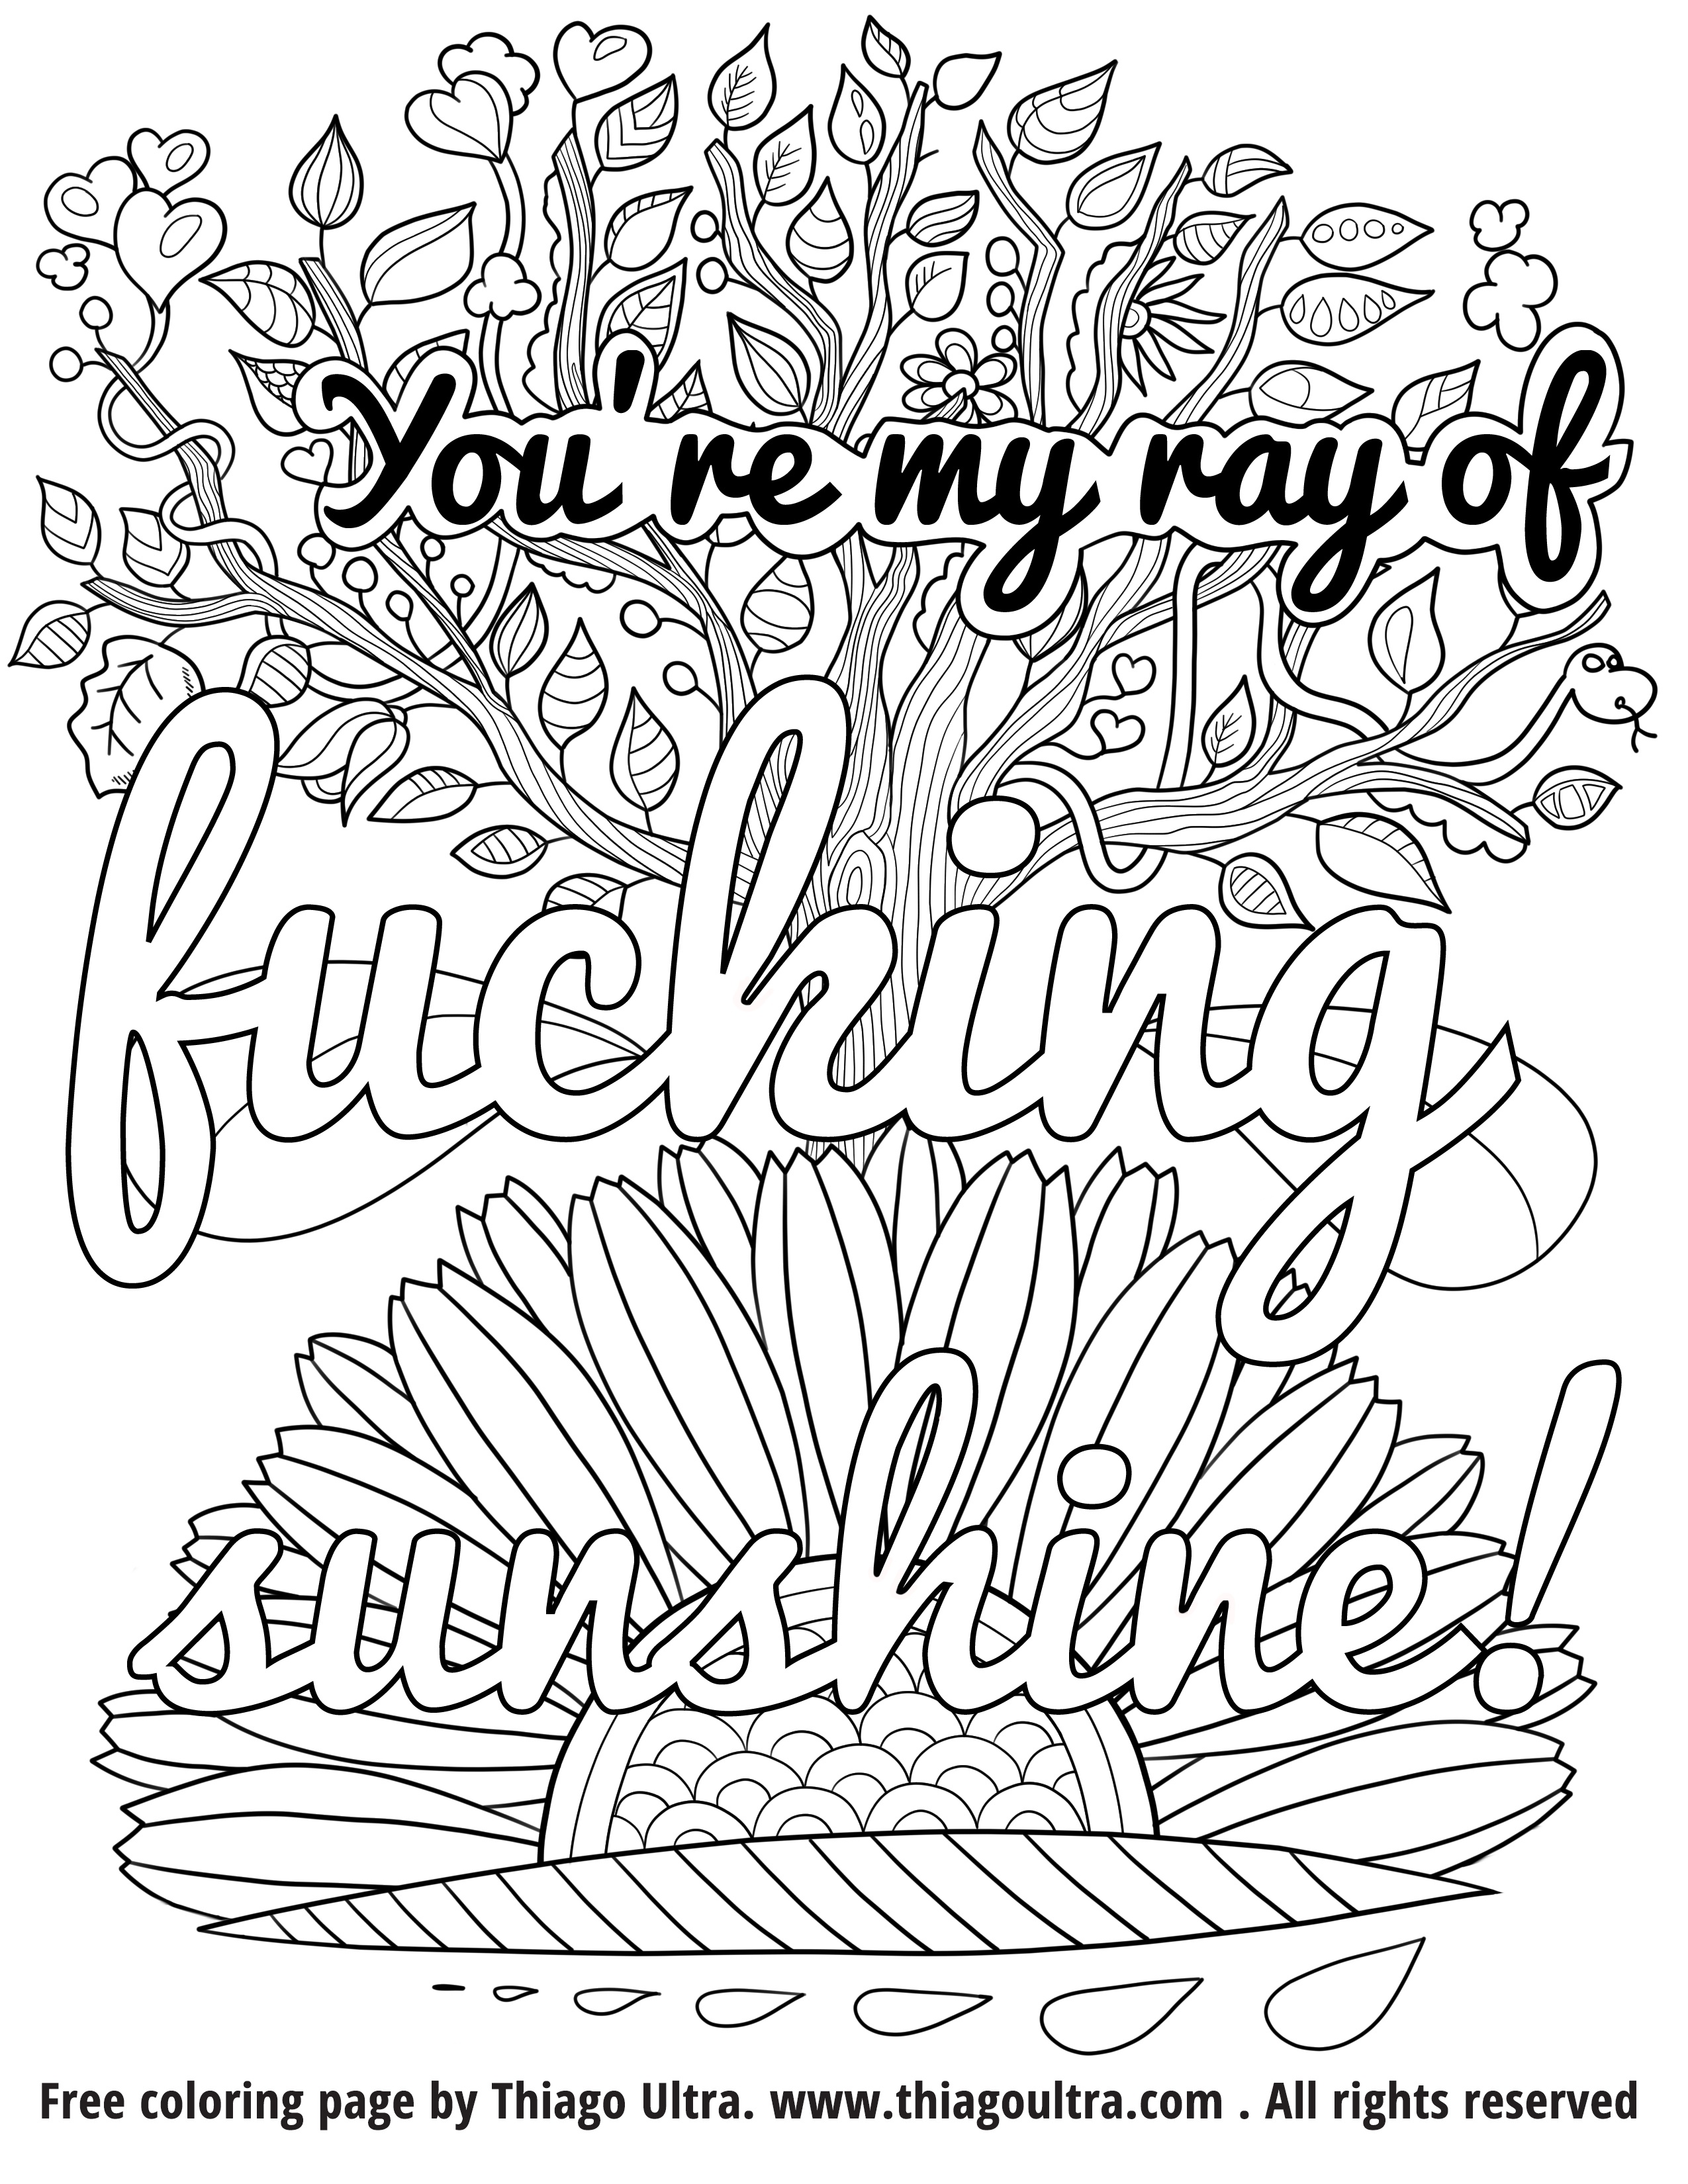 Coloring Ideas : 1840D37706A73E0C394A077851E5964E_Focus Free - Free Printable Coloring Pages For Adults Only Swear Words